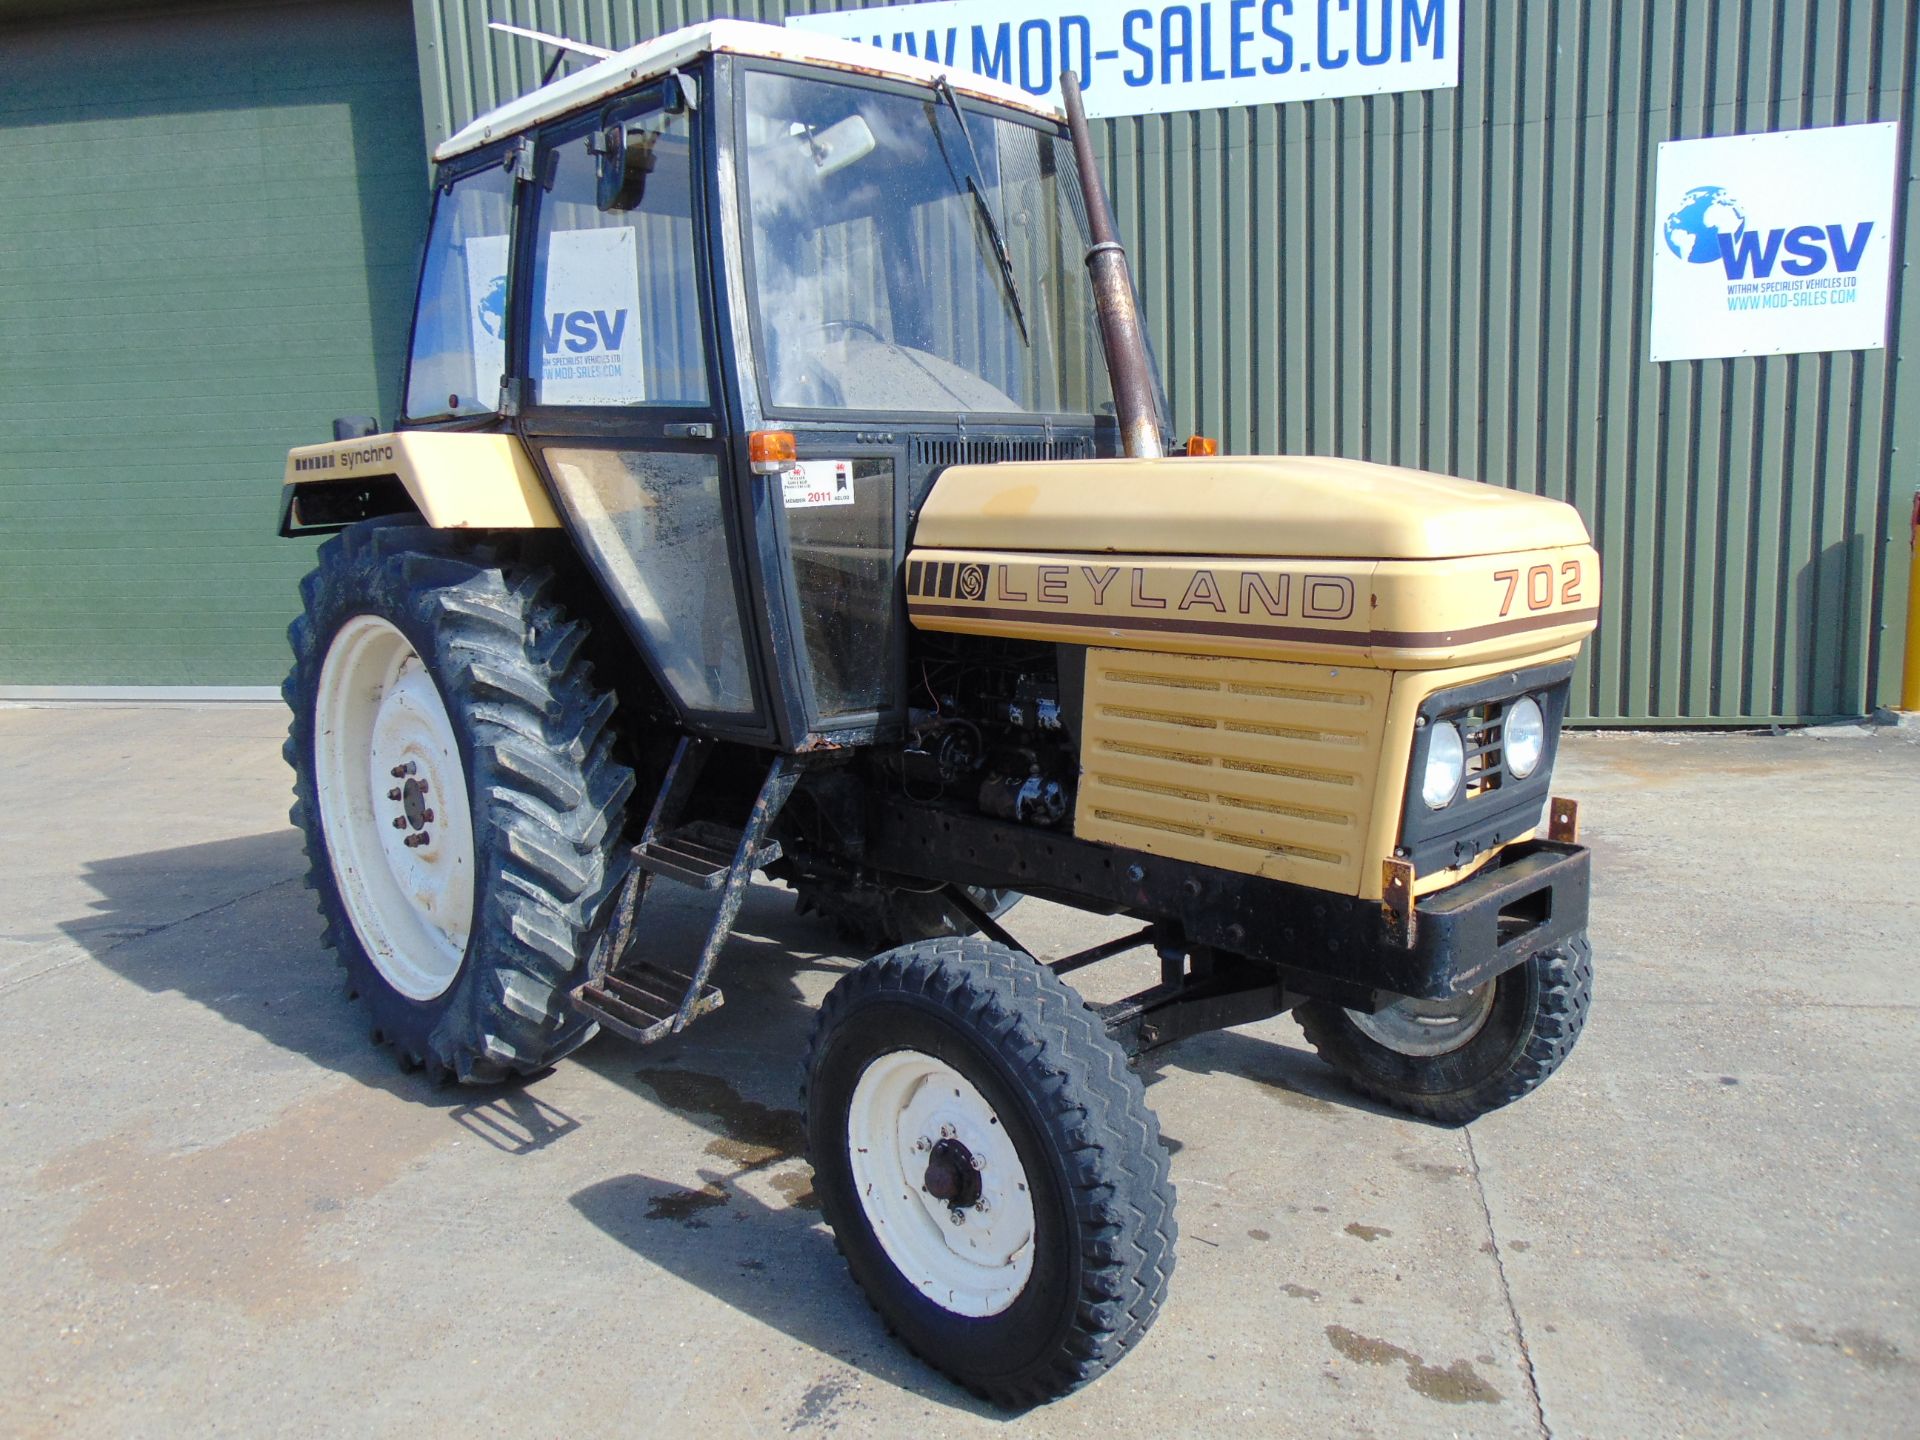 Leyland 702 Synchro 2WD Tractor Only 3,507 Hours - Image 3 of 22